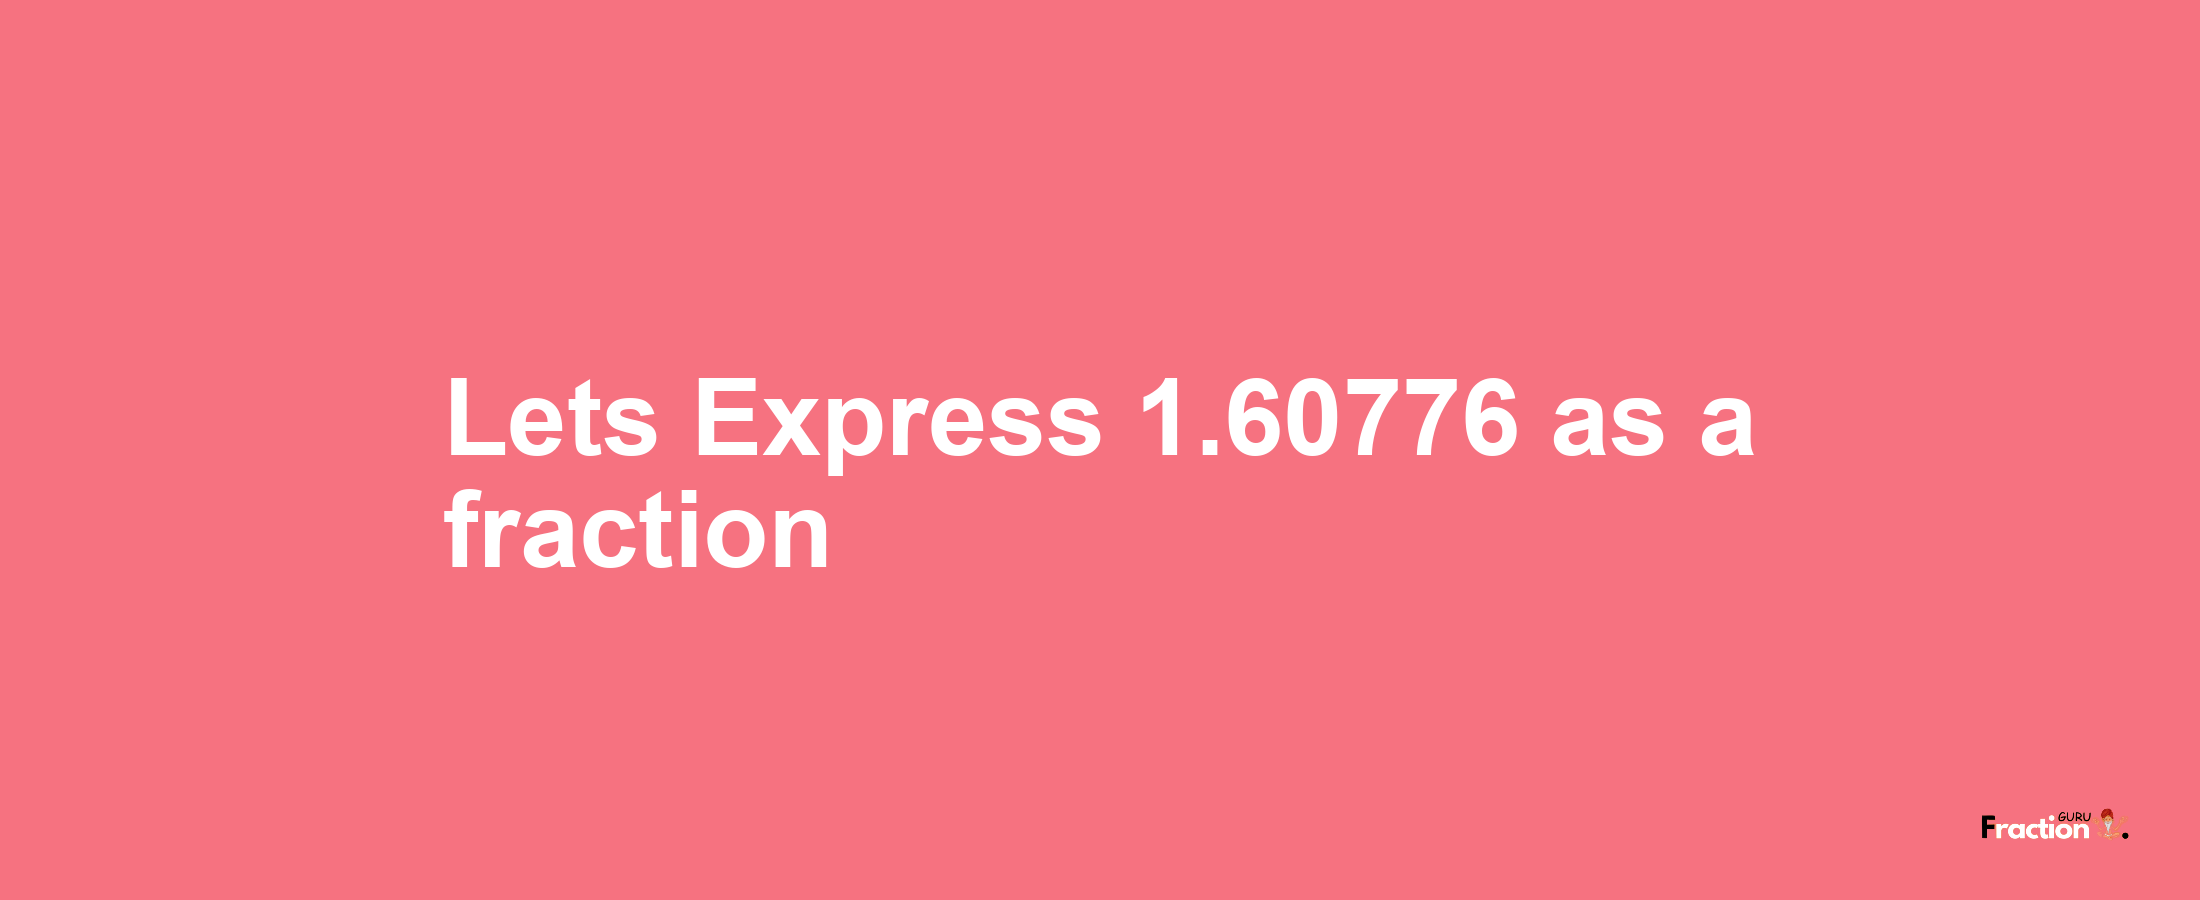 Lets Express 1.60776 as afraction